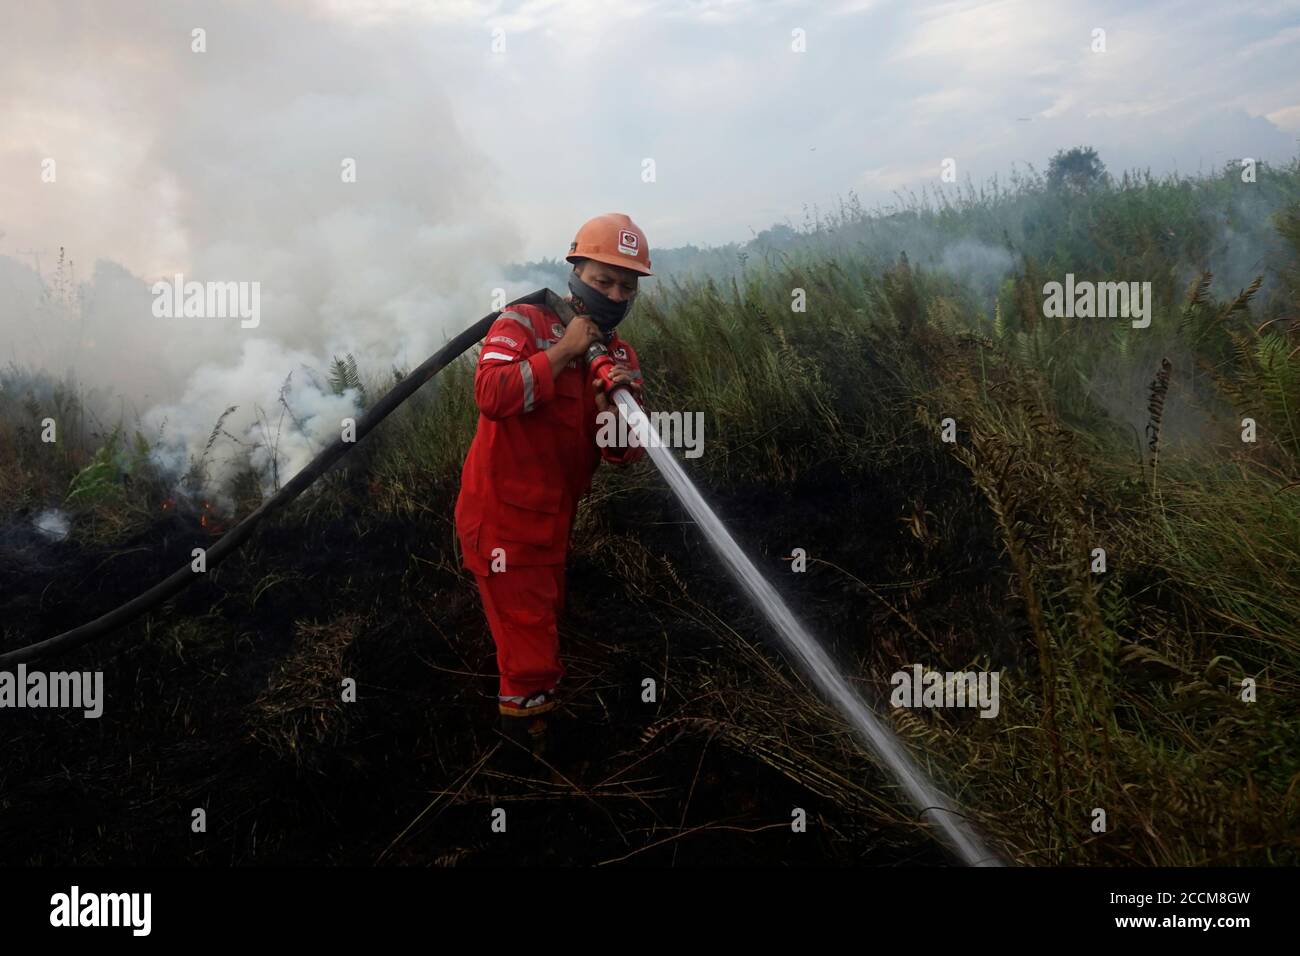 Ogan Ilir Regency, Indonesia. 23rd Aug, 2020. The Indonesian National Army, BNPB and Maggala Agni are extinguishing fires from forest and land fires in KTM Village, Ogan Ilir Regency, South Sumatra. (Photo by Sigit Prasetya/Pacific Press) Credit: Pacific Press Media Production Corp./Alamy Live News Stock Photo